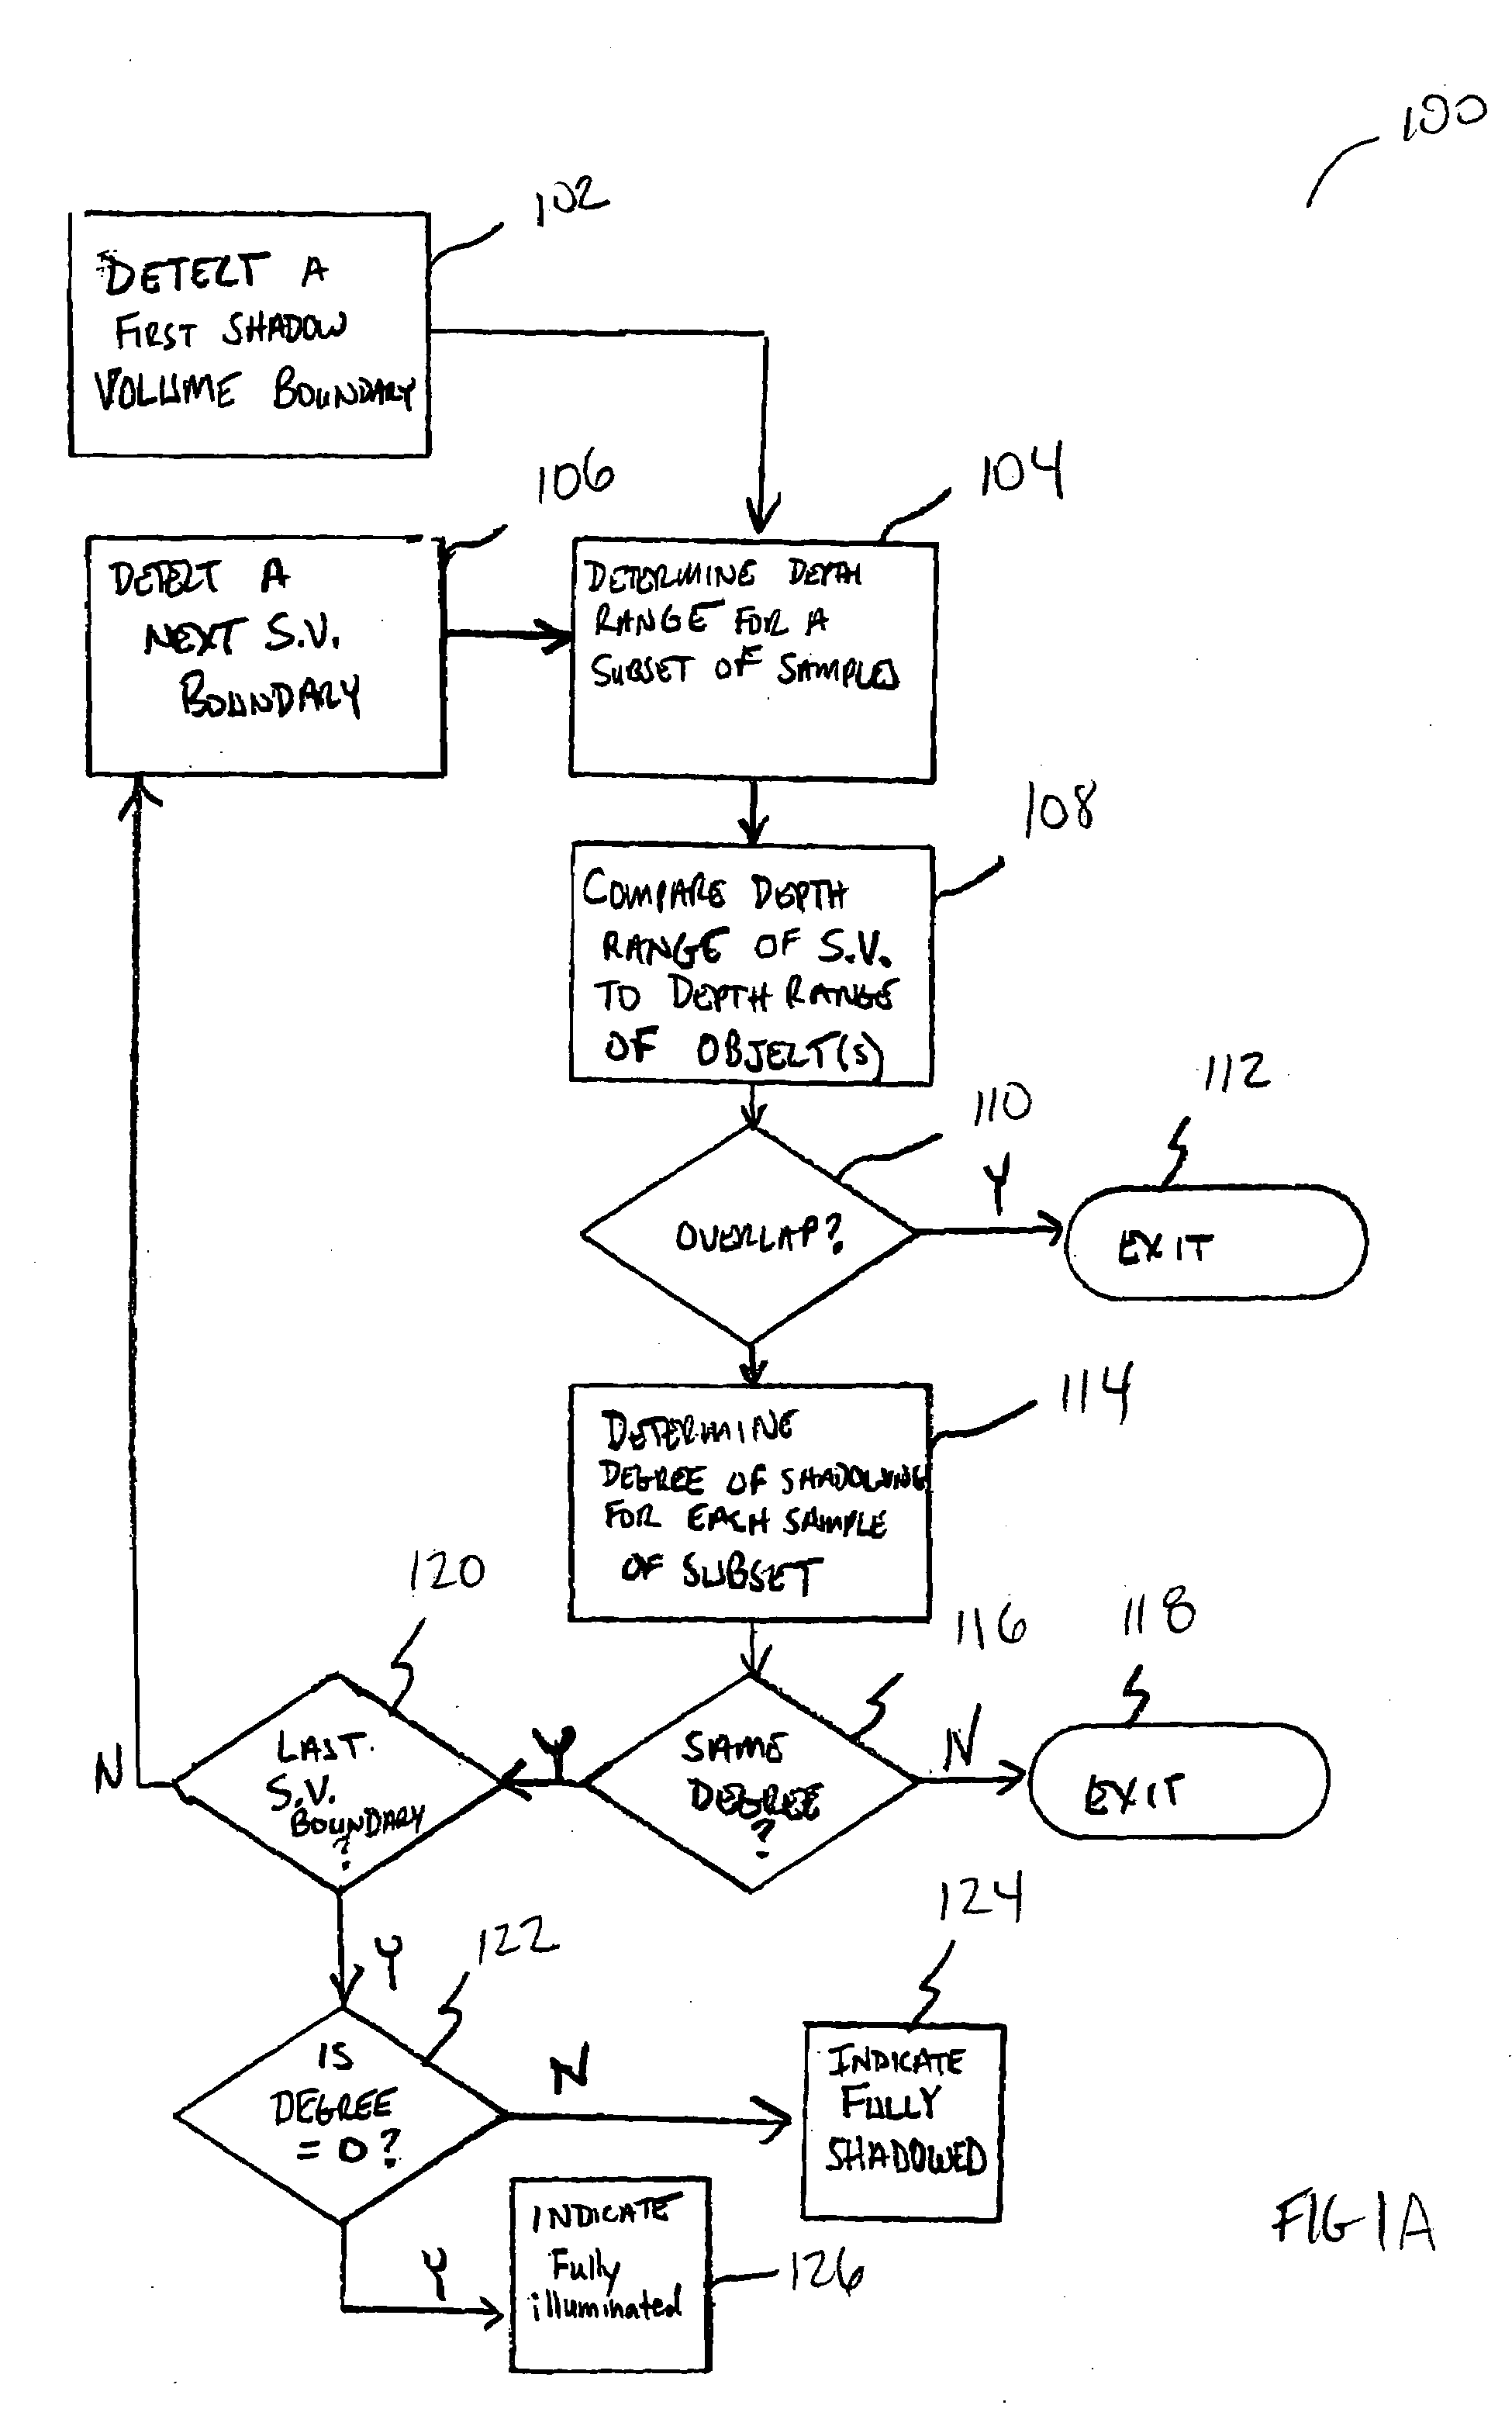 Method and apparatus to accelerate rendering of shadow effects for computer-generated images